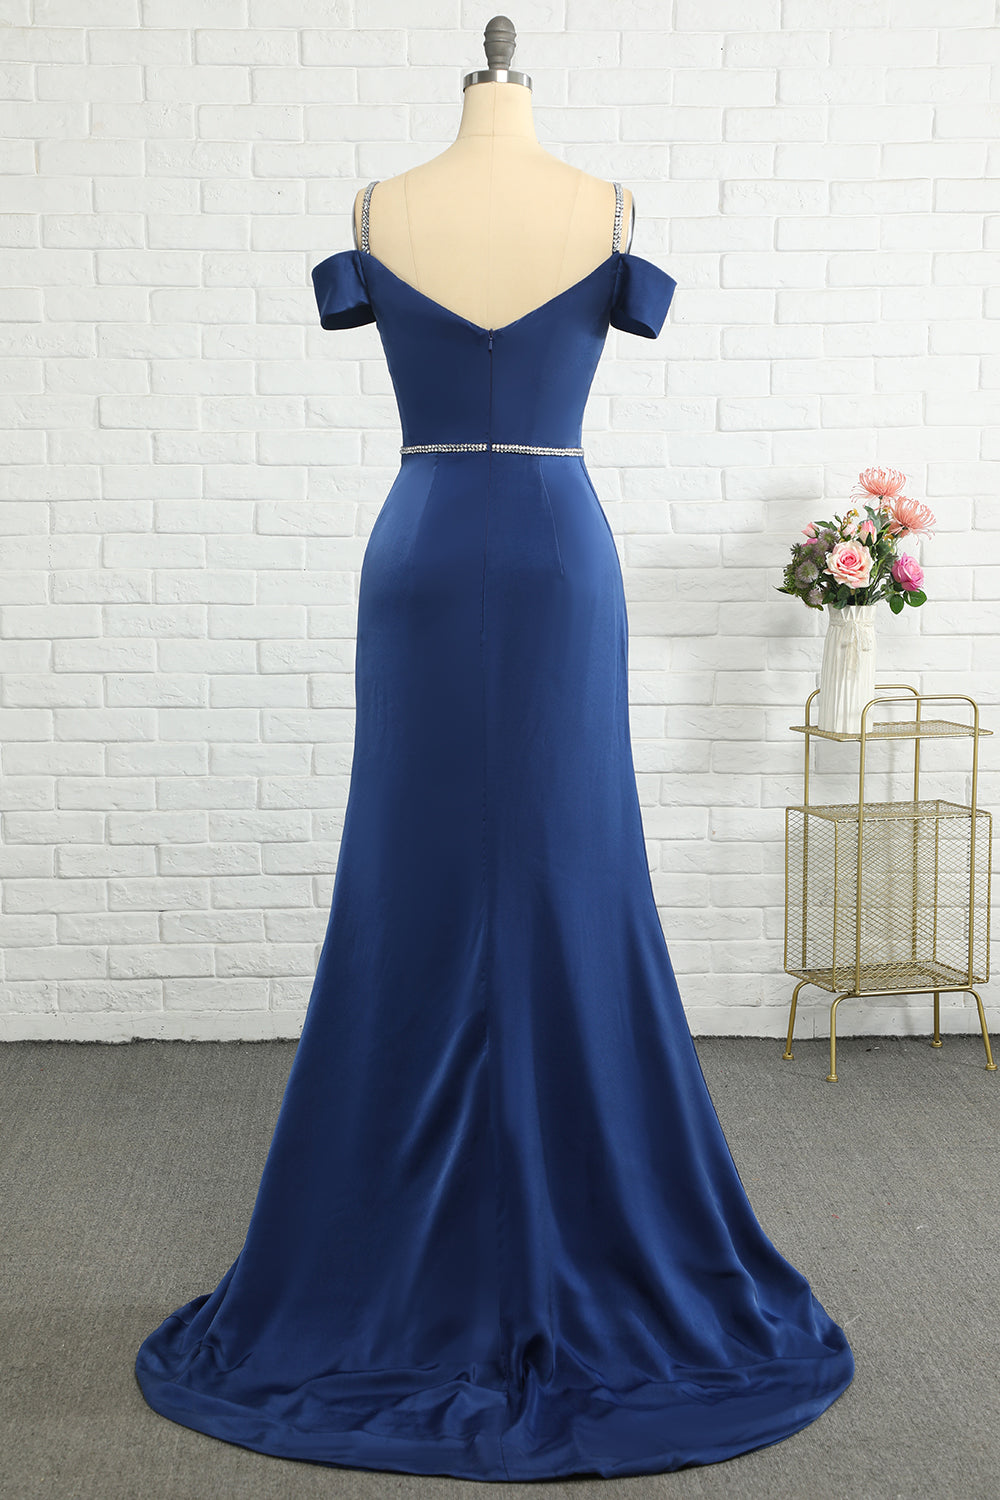 Mermaid Off the Shoulder Navy Bridesmaid Dress with Beading